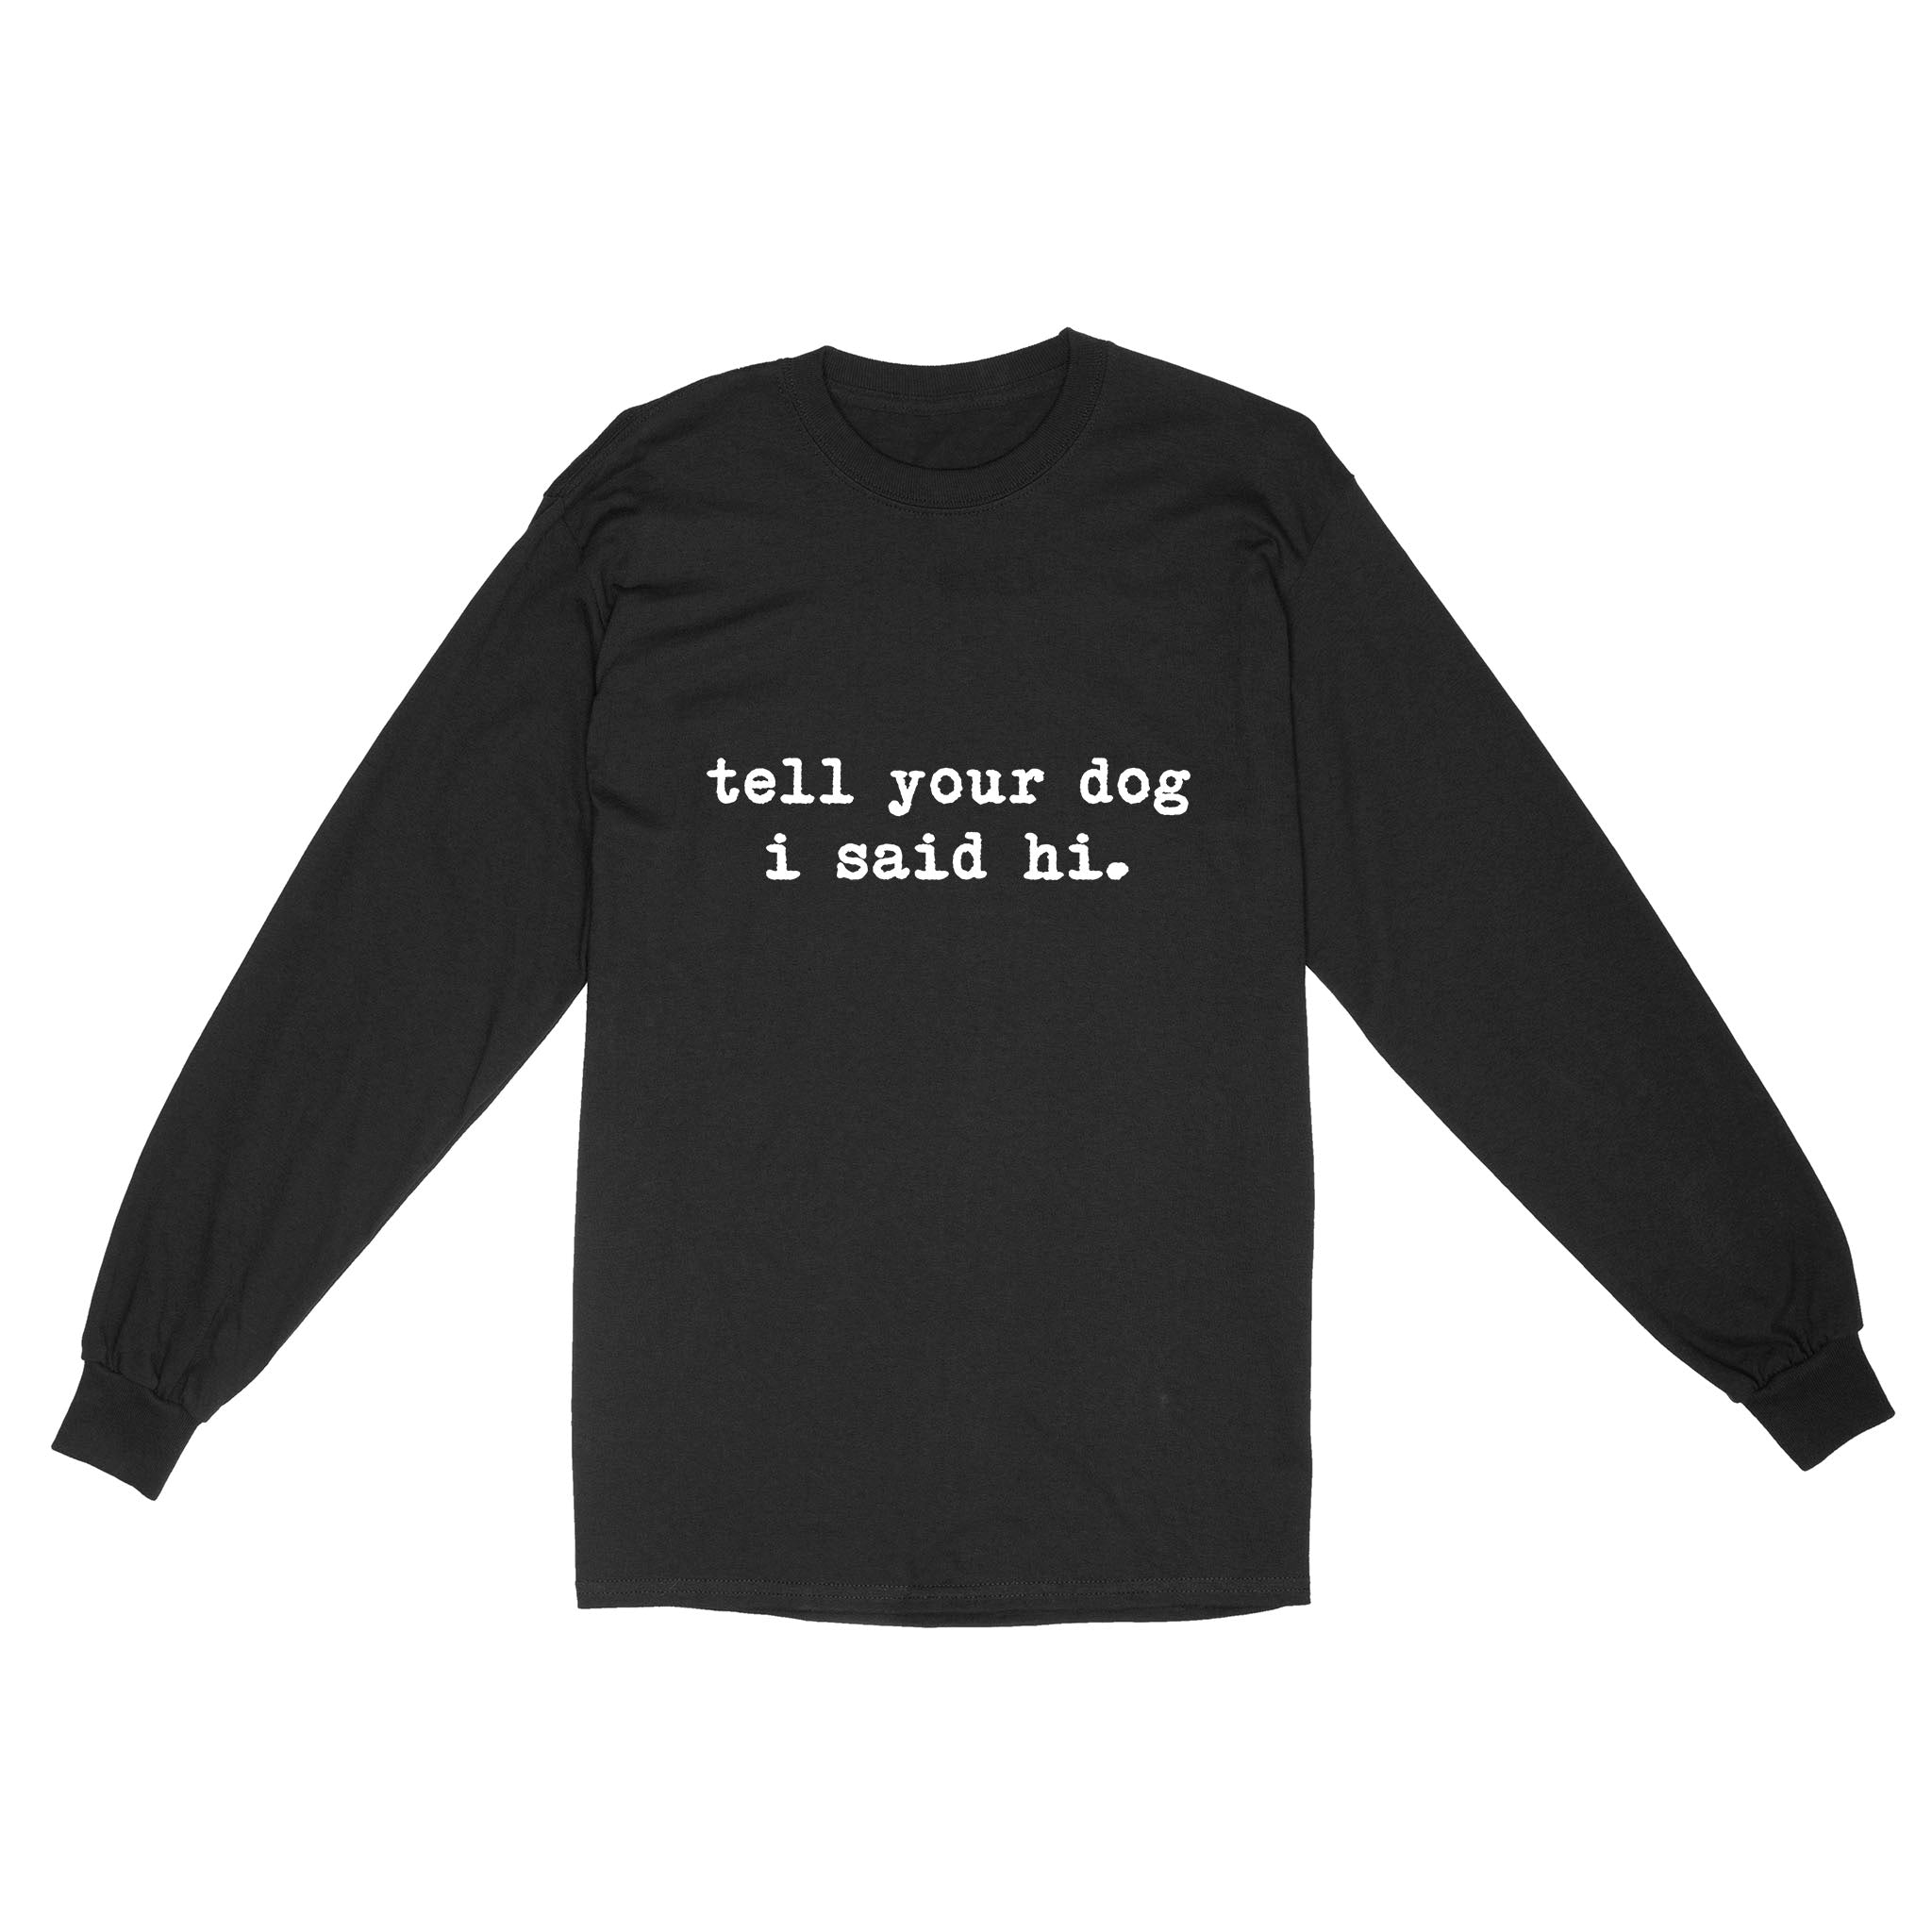 Funny "Tell Your Dog I Said Hi" shirt for Dog Lovers Standard Long Sleeve FSD2432D08